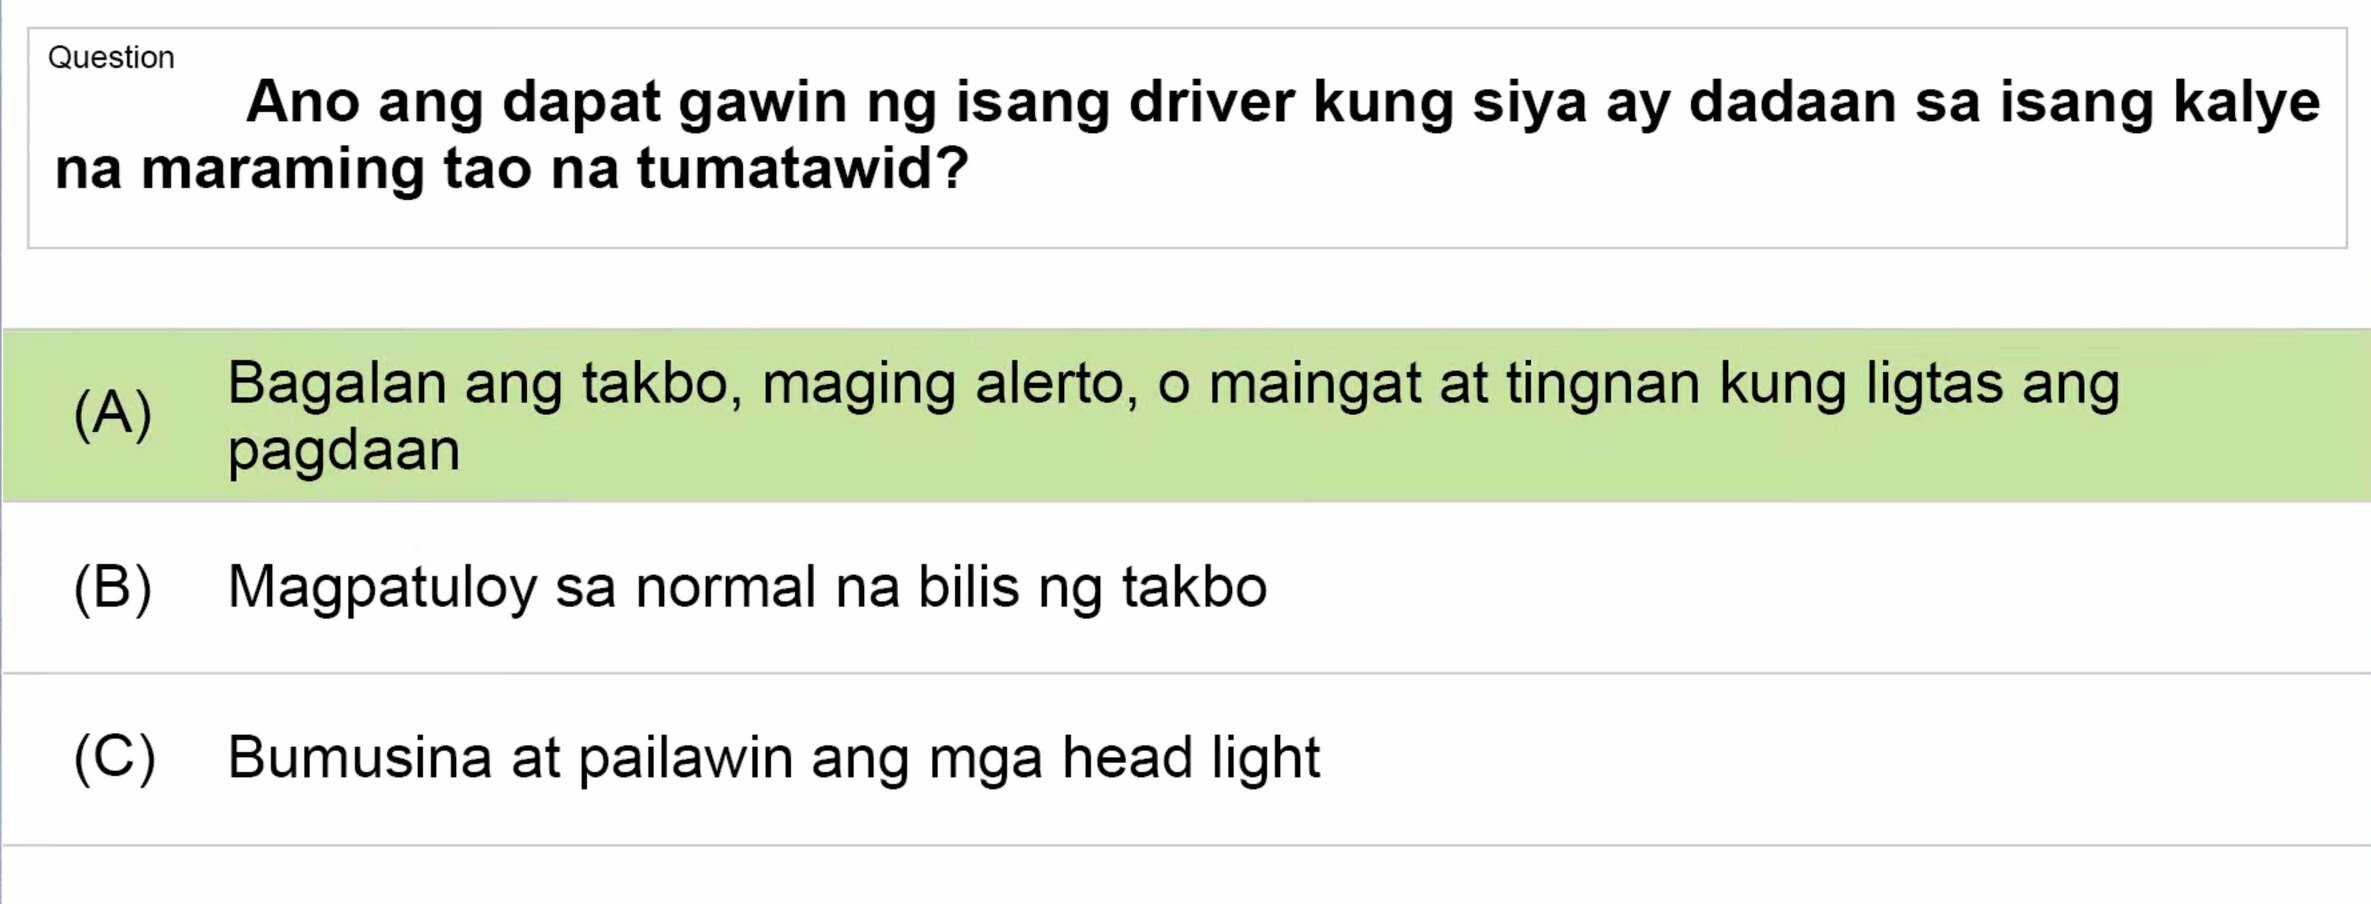 LTO Tagalog non professional exam reviewer motorcycle 1 (5)